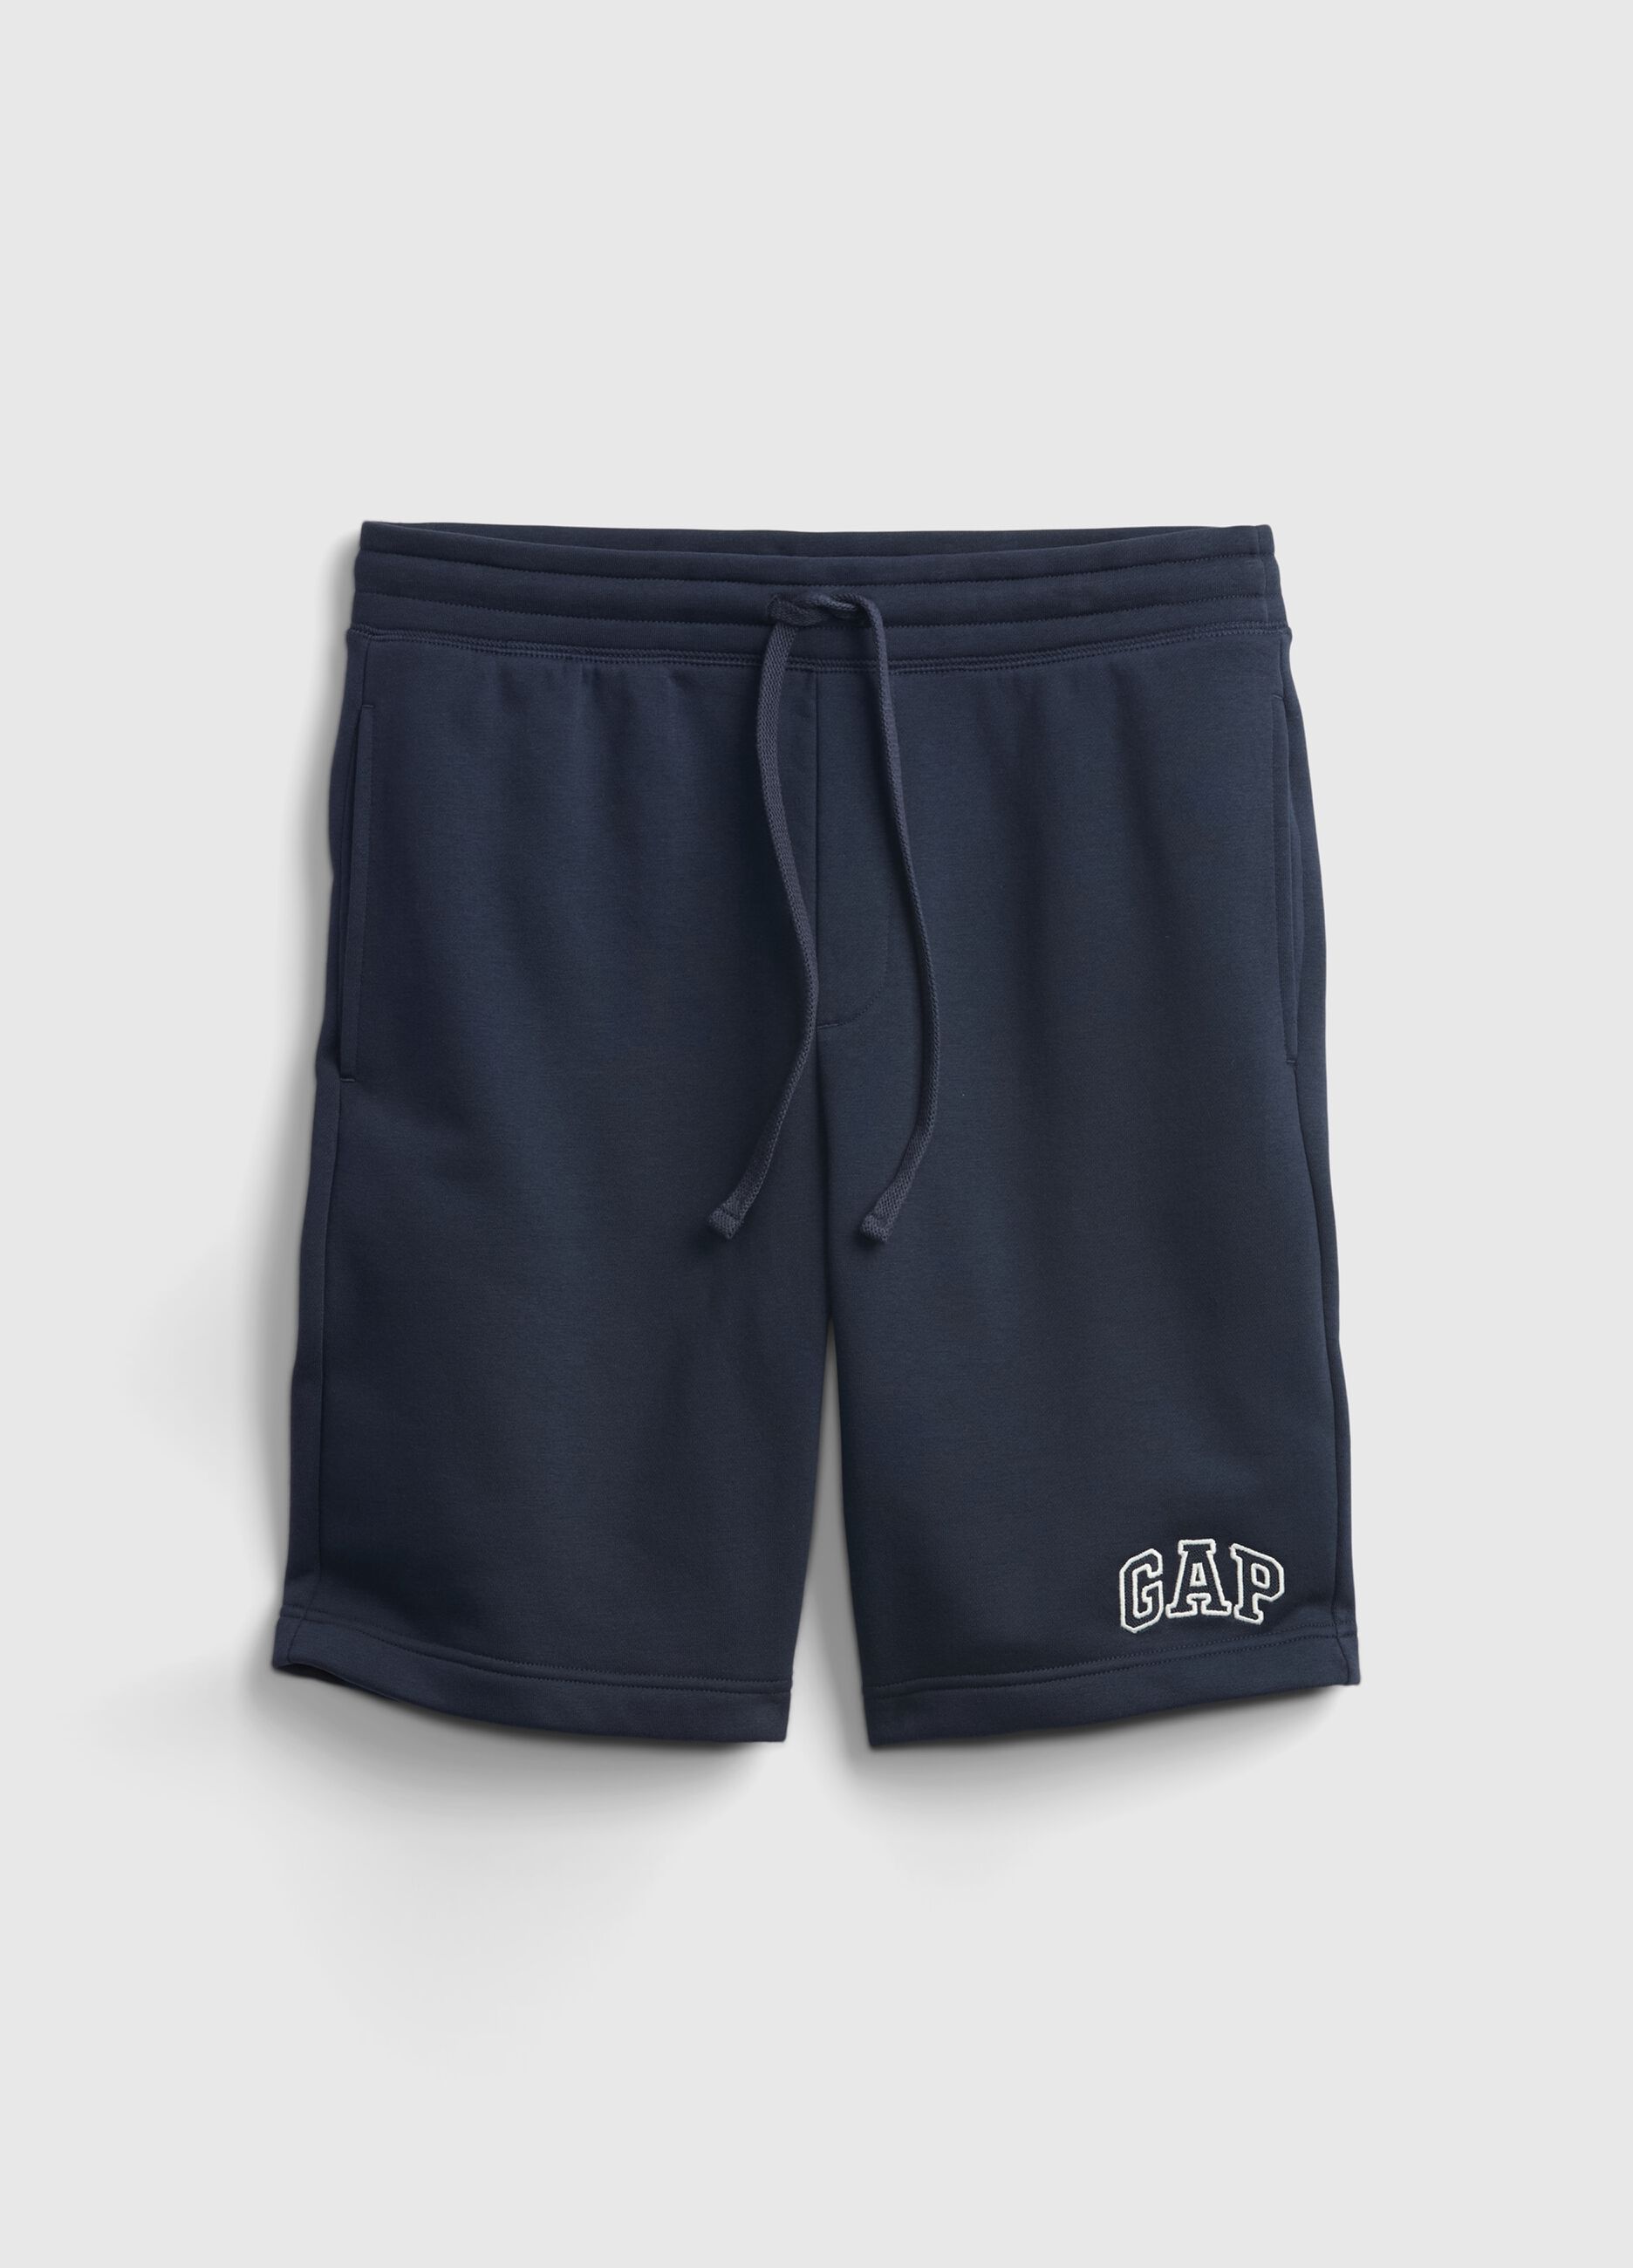 Plush Bermuda shorts with embroidered logo